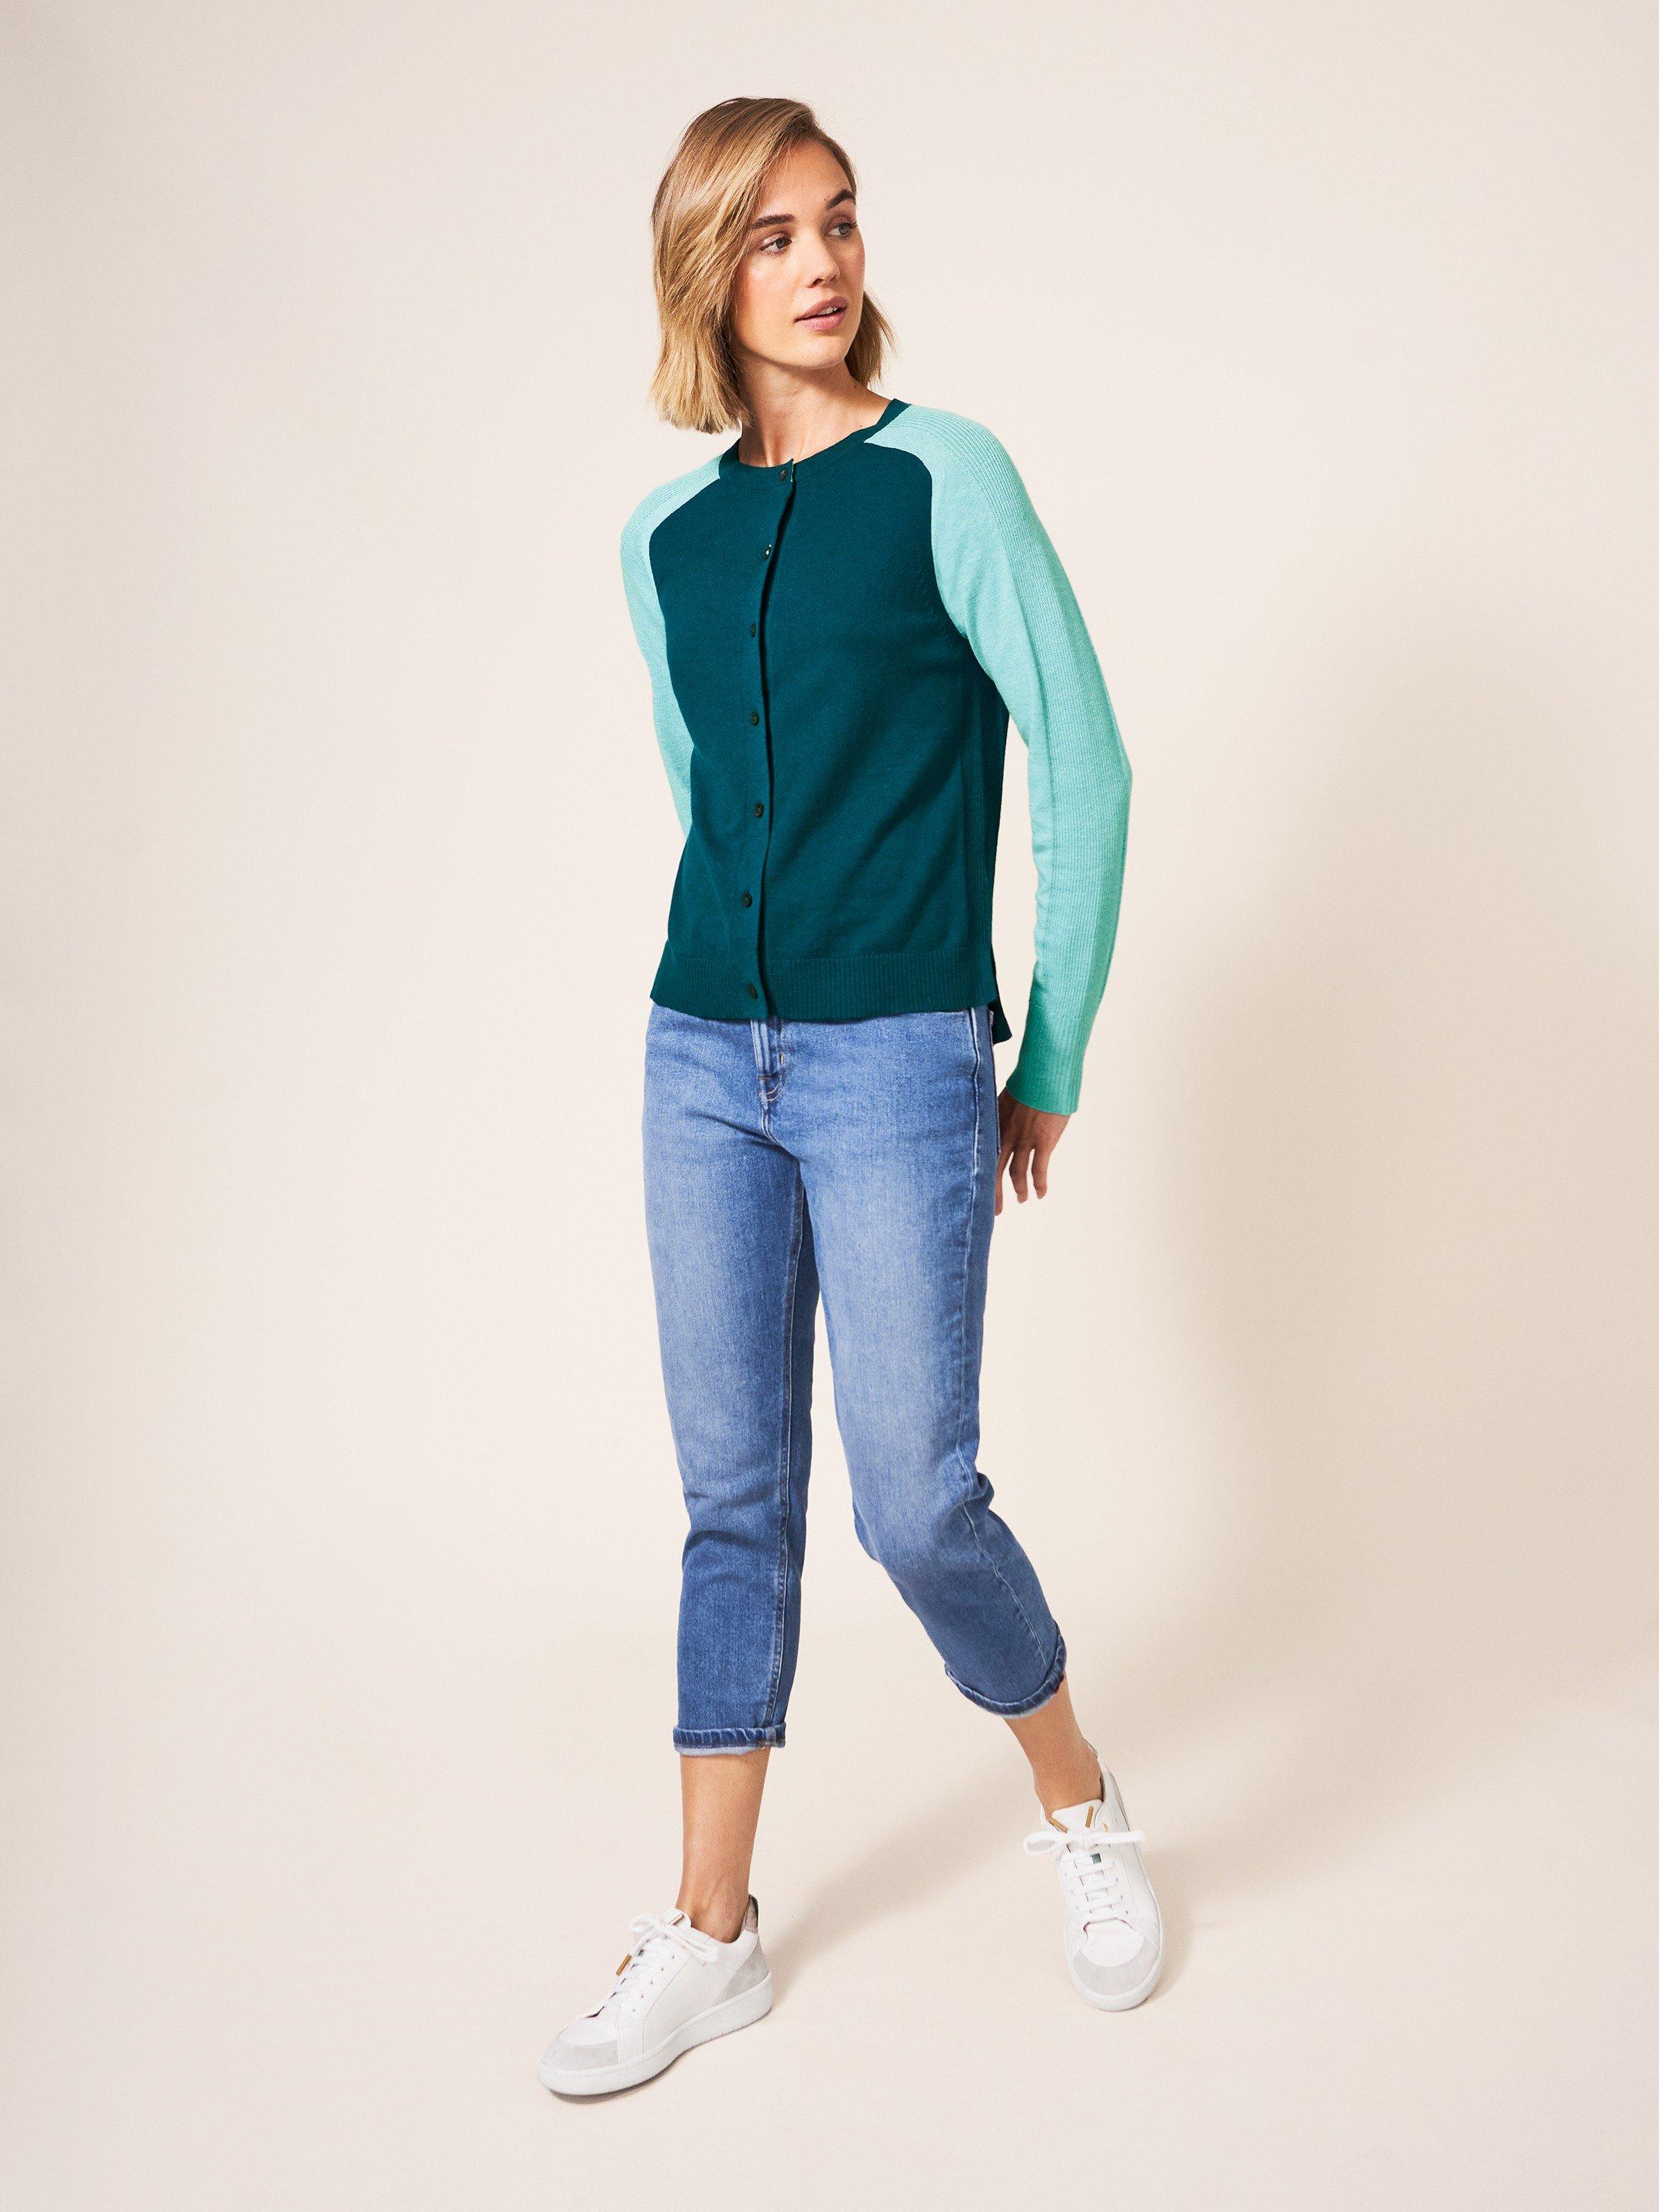 Libby Crew Neck Cardi in MID TEAL - MODEL FRONT